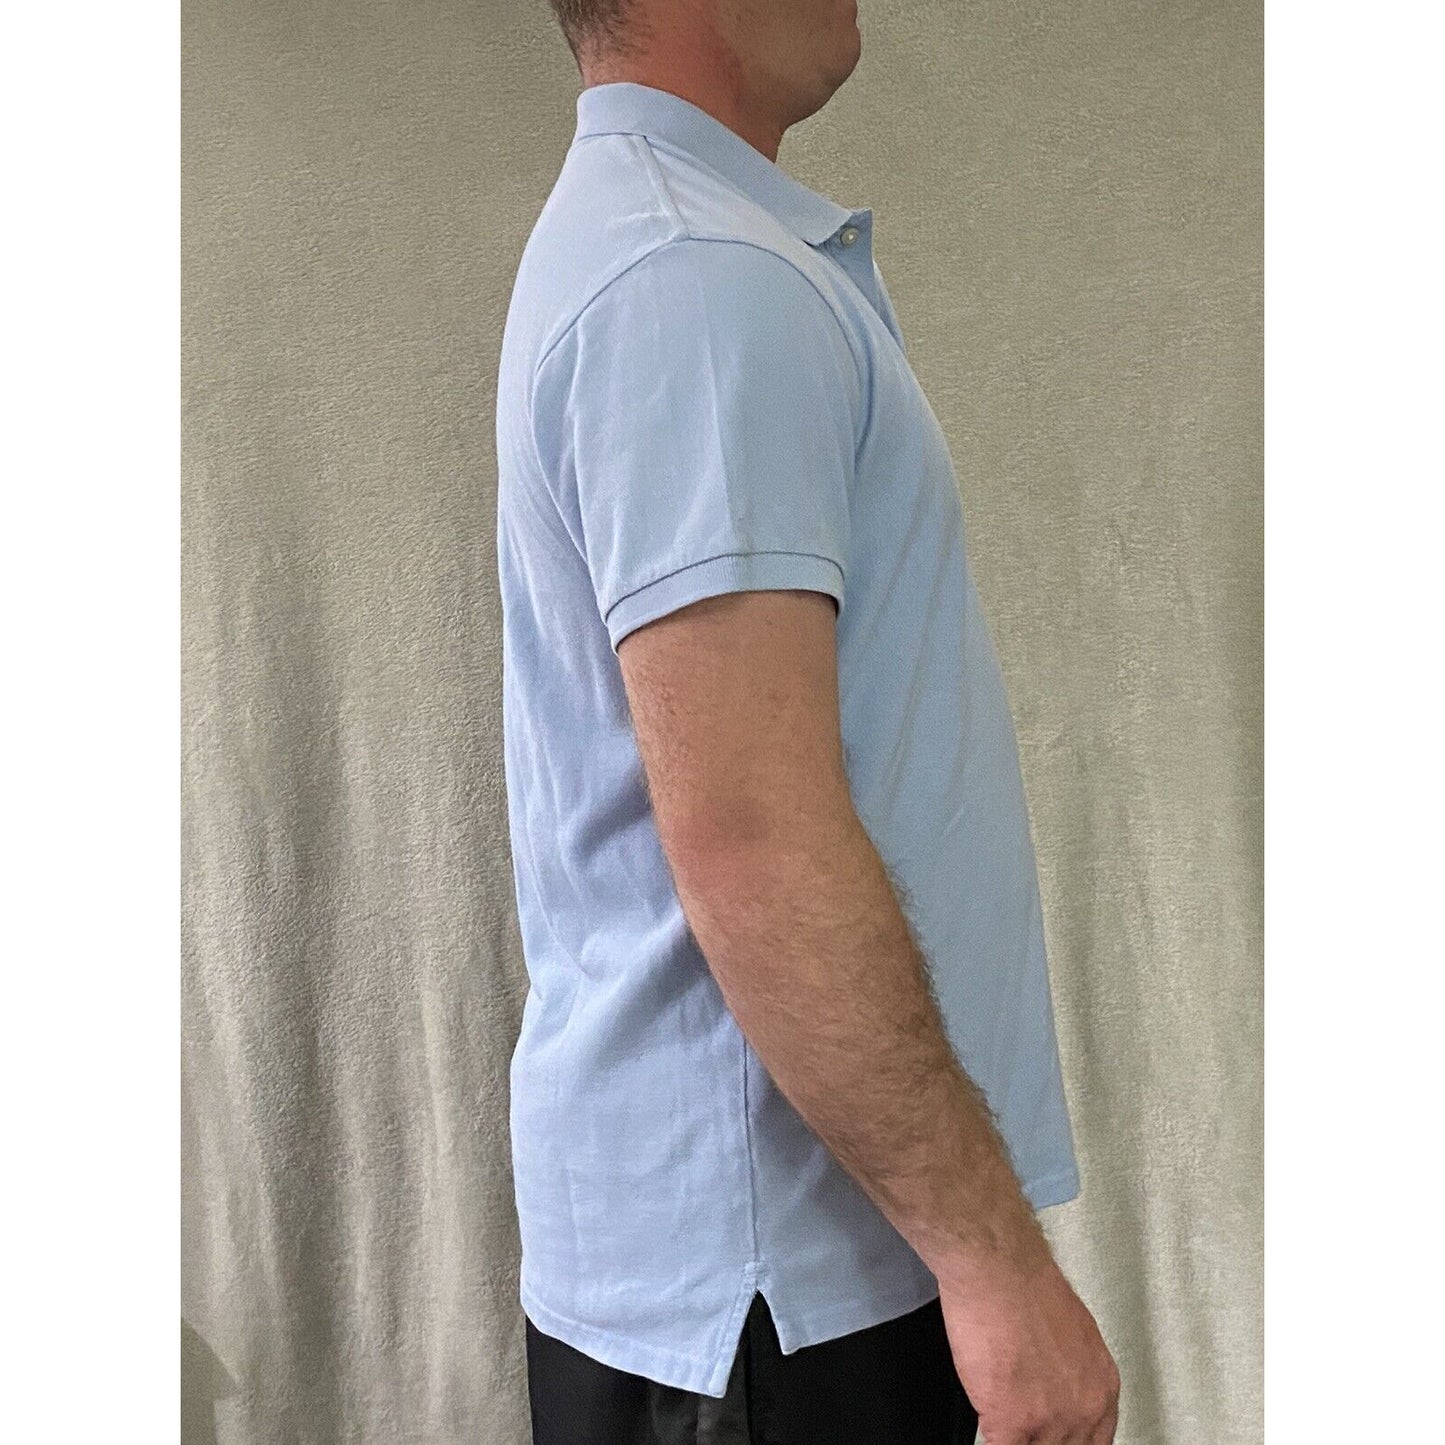 Banana Republic Light Blue Periwinkle Men’s Large Fitted Cotton Polo Shirt